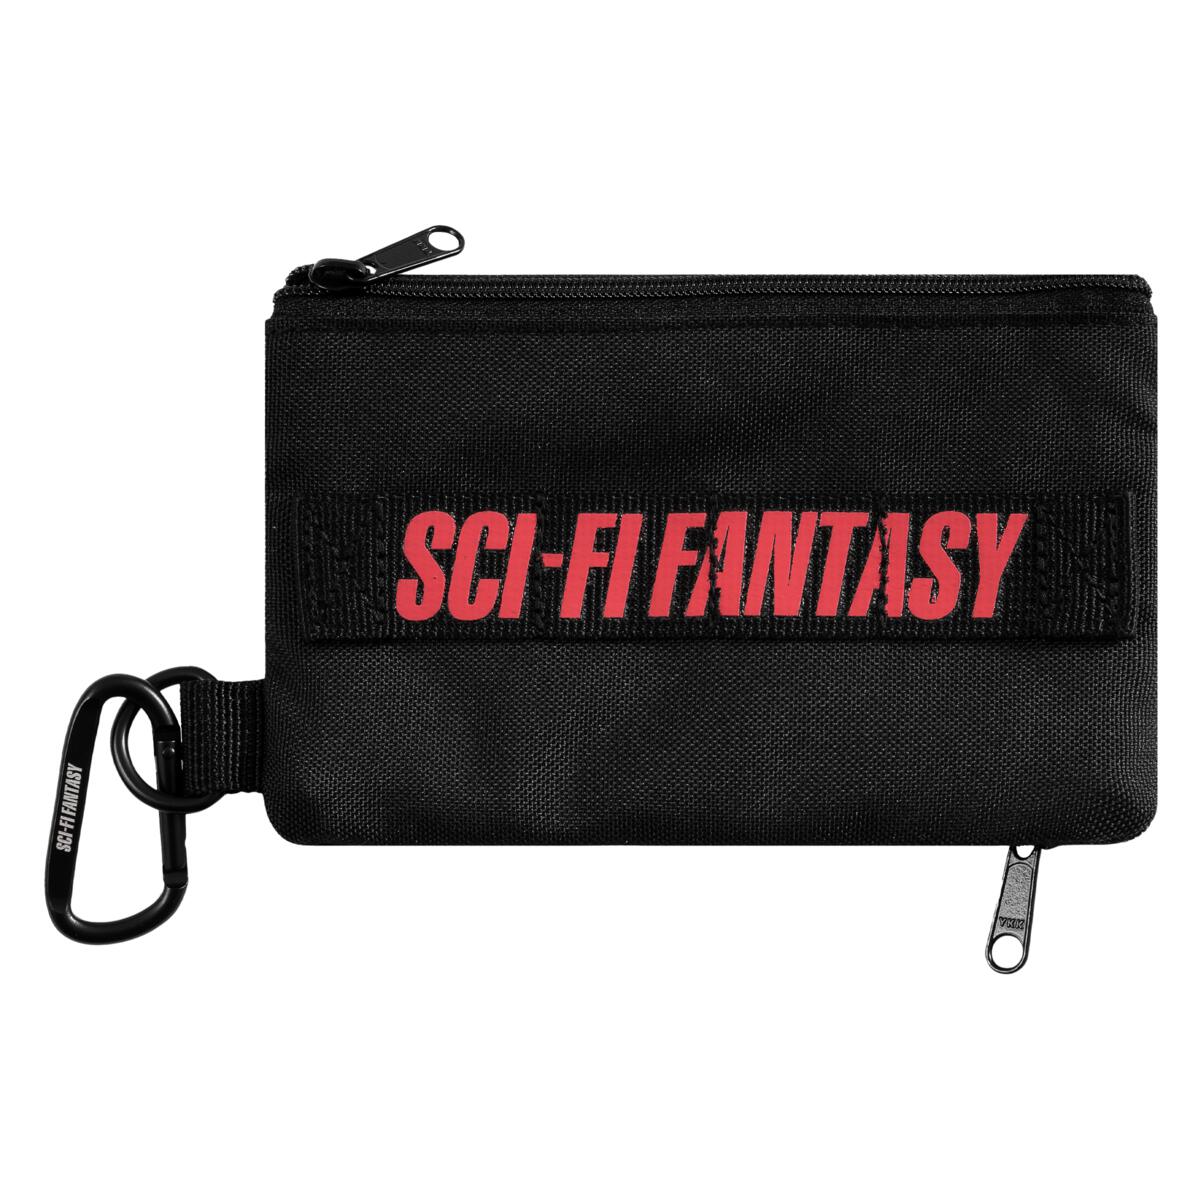 SCI-FI FANTASY CARRY-ALL POUCH COLOR VARIANT